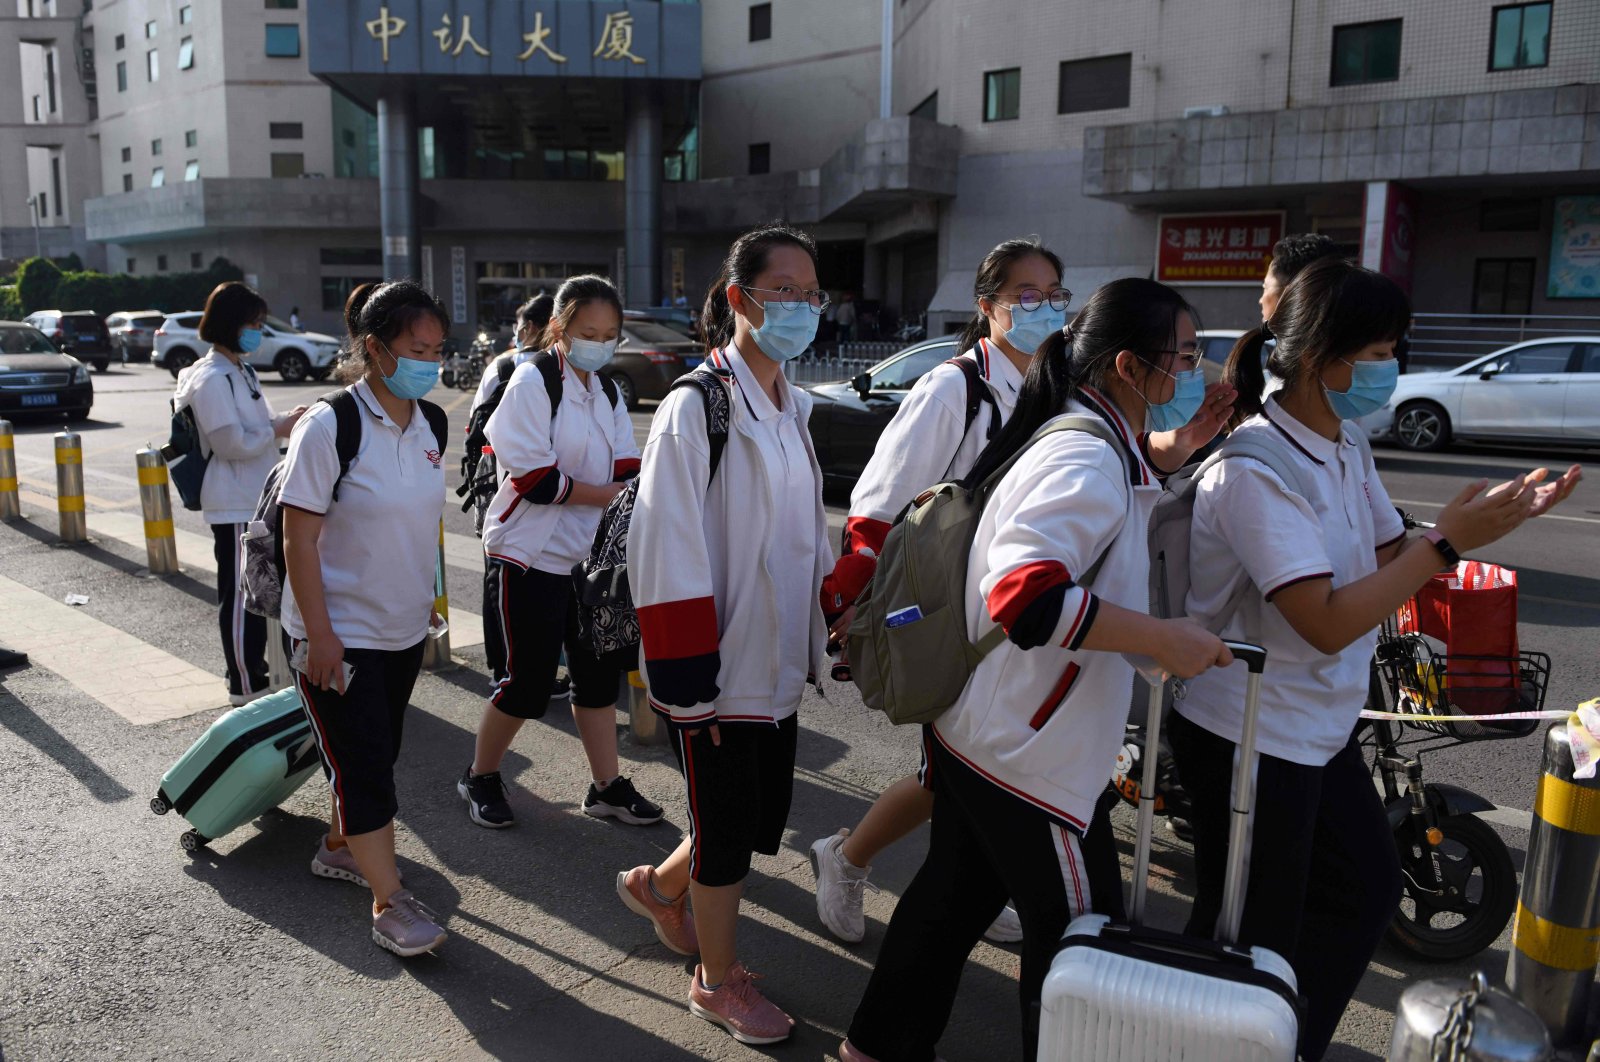 High school students leave at the end of their school day in Beijing, June 12, 2020. (AFP Photo)